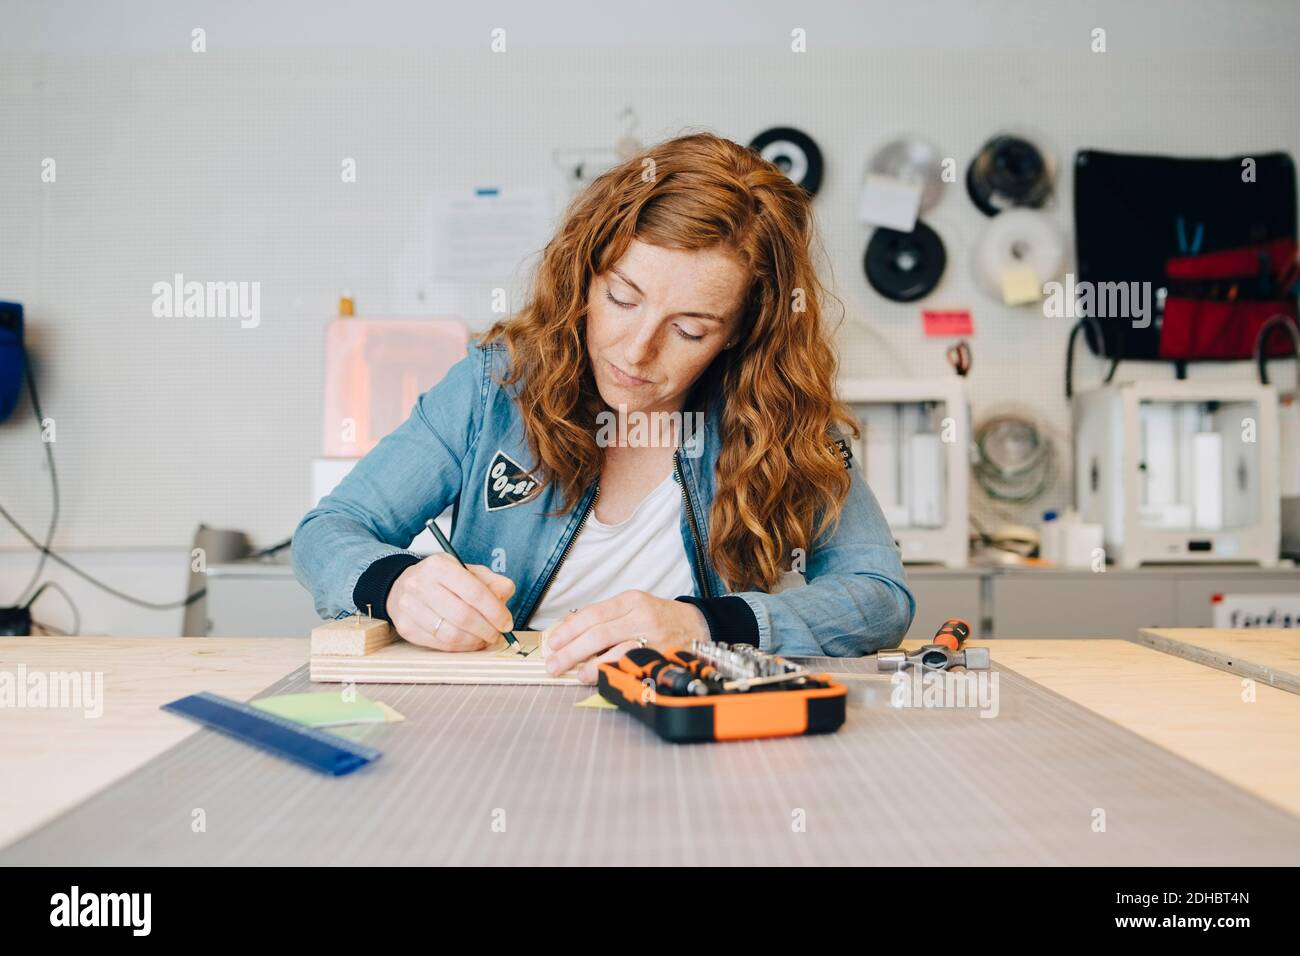 Confident redhead female engineer writing on wood at workbench in creative office Stock Photo